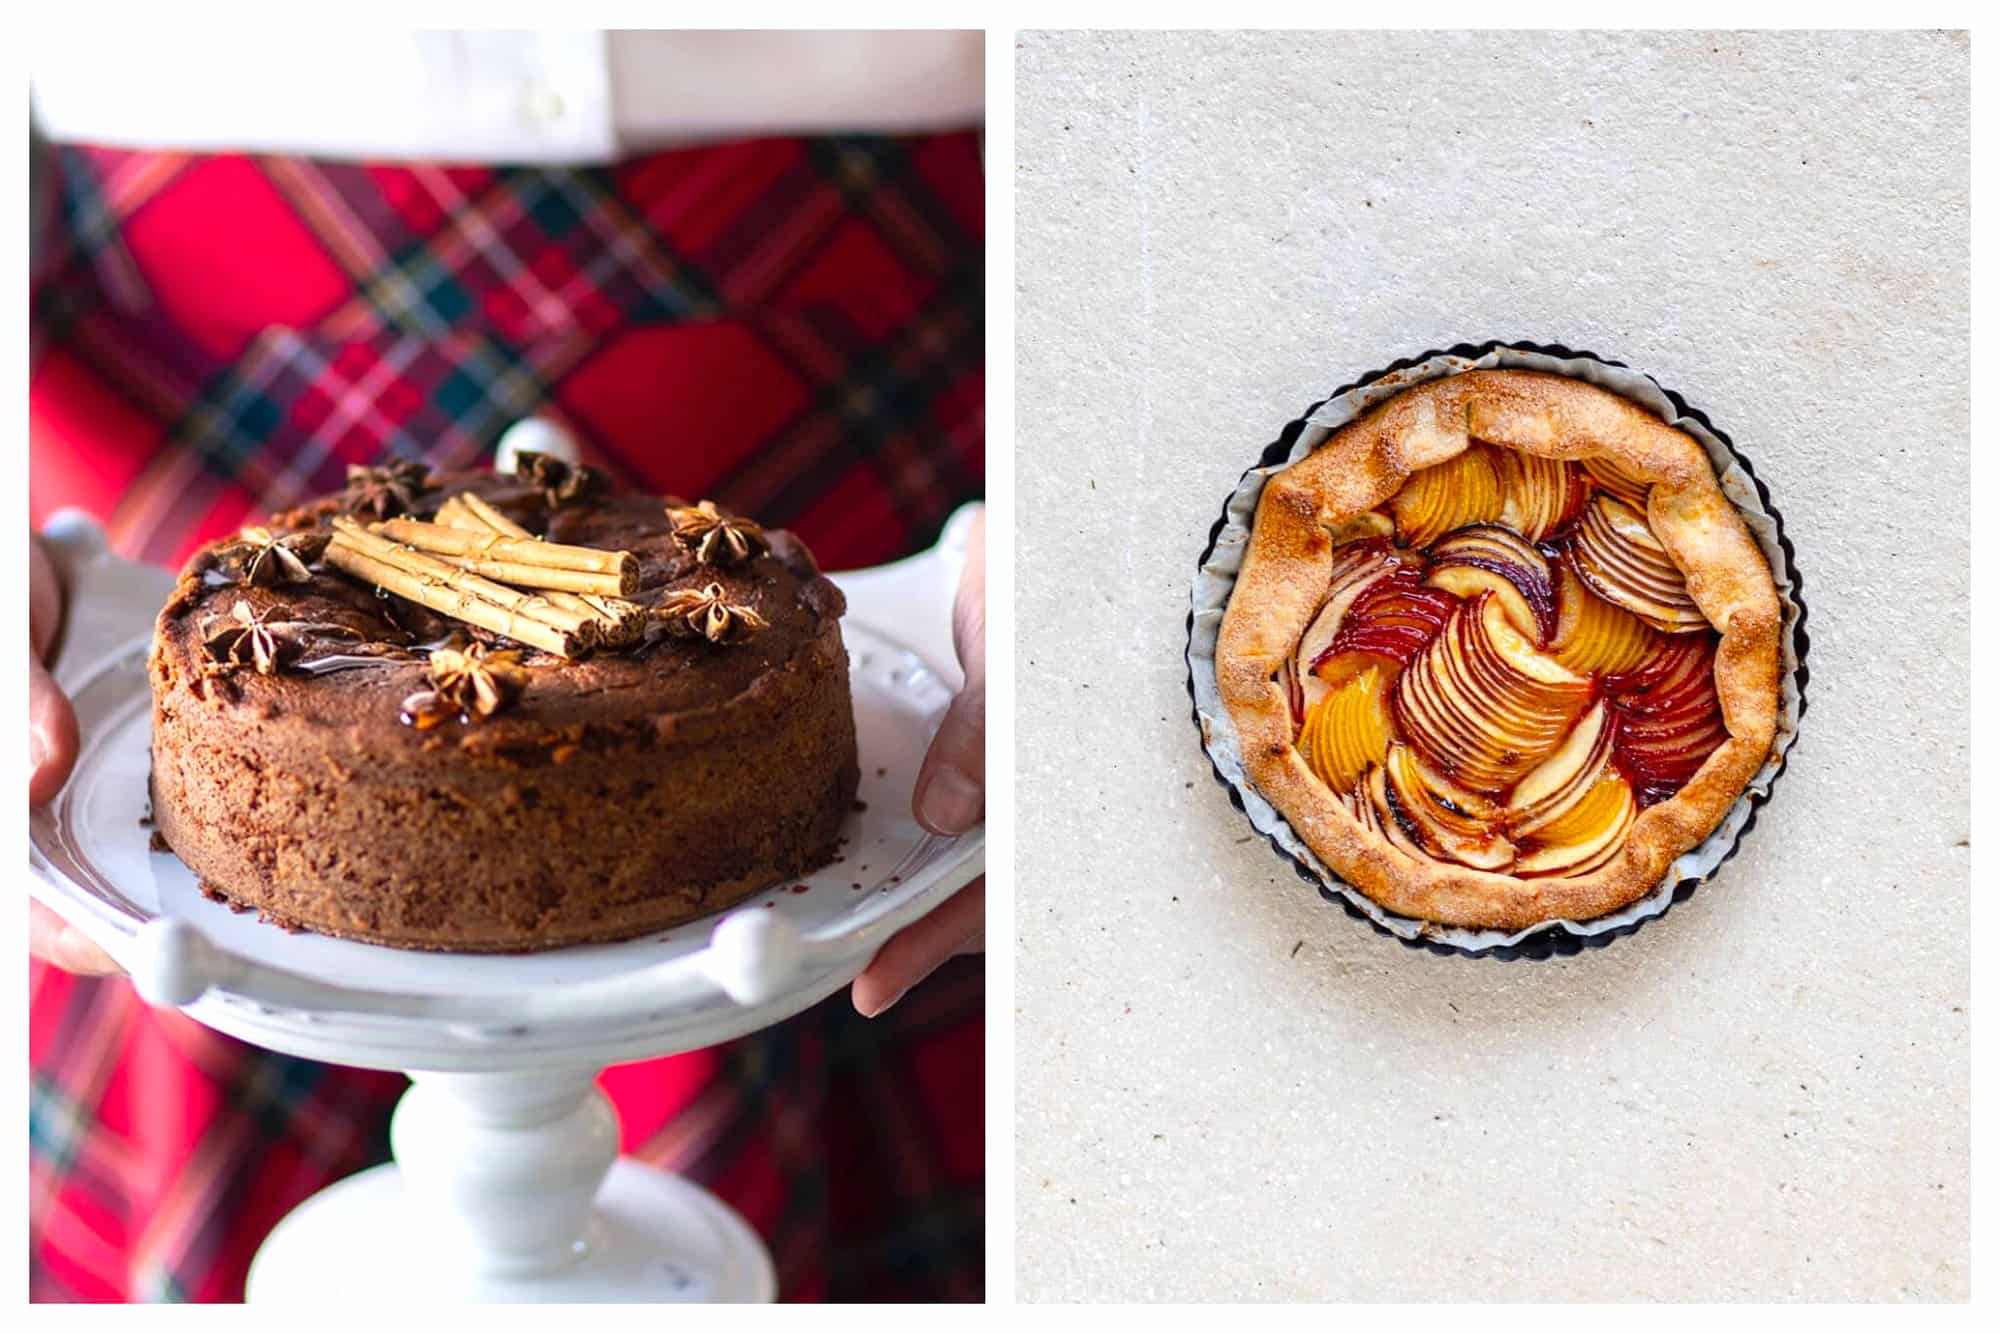 Left: A woman wearing a plaid skirt holding a chocolate cake on a white platter. Left: A peach pie. 